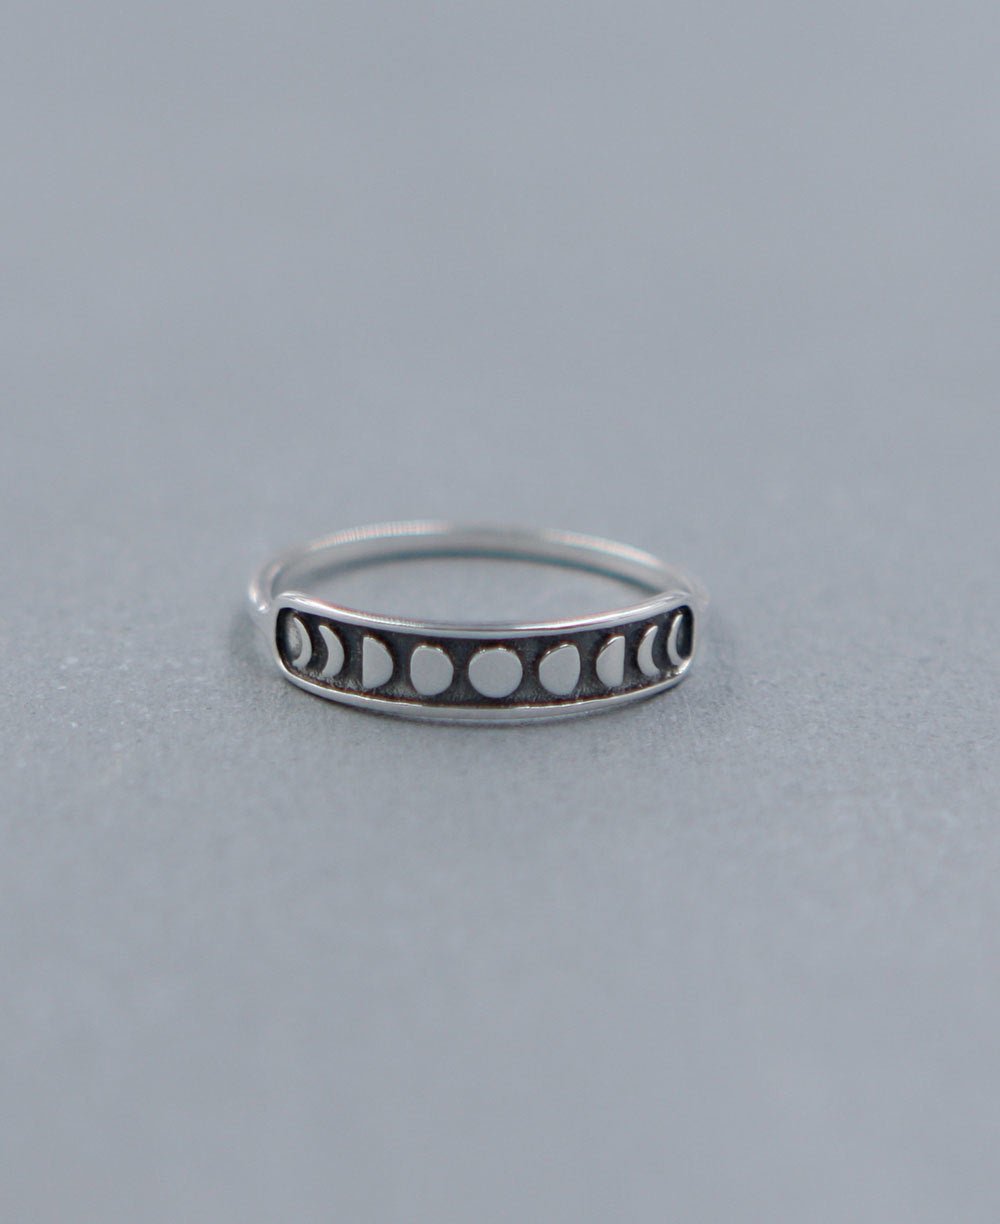 Phases of the Moon Sterling Silver Ring - Rings Size 6